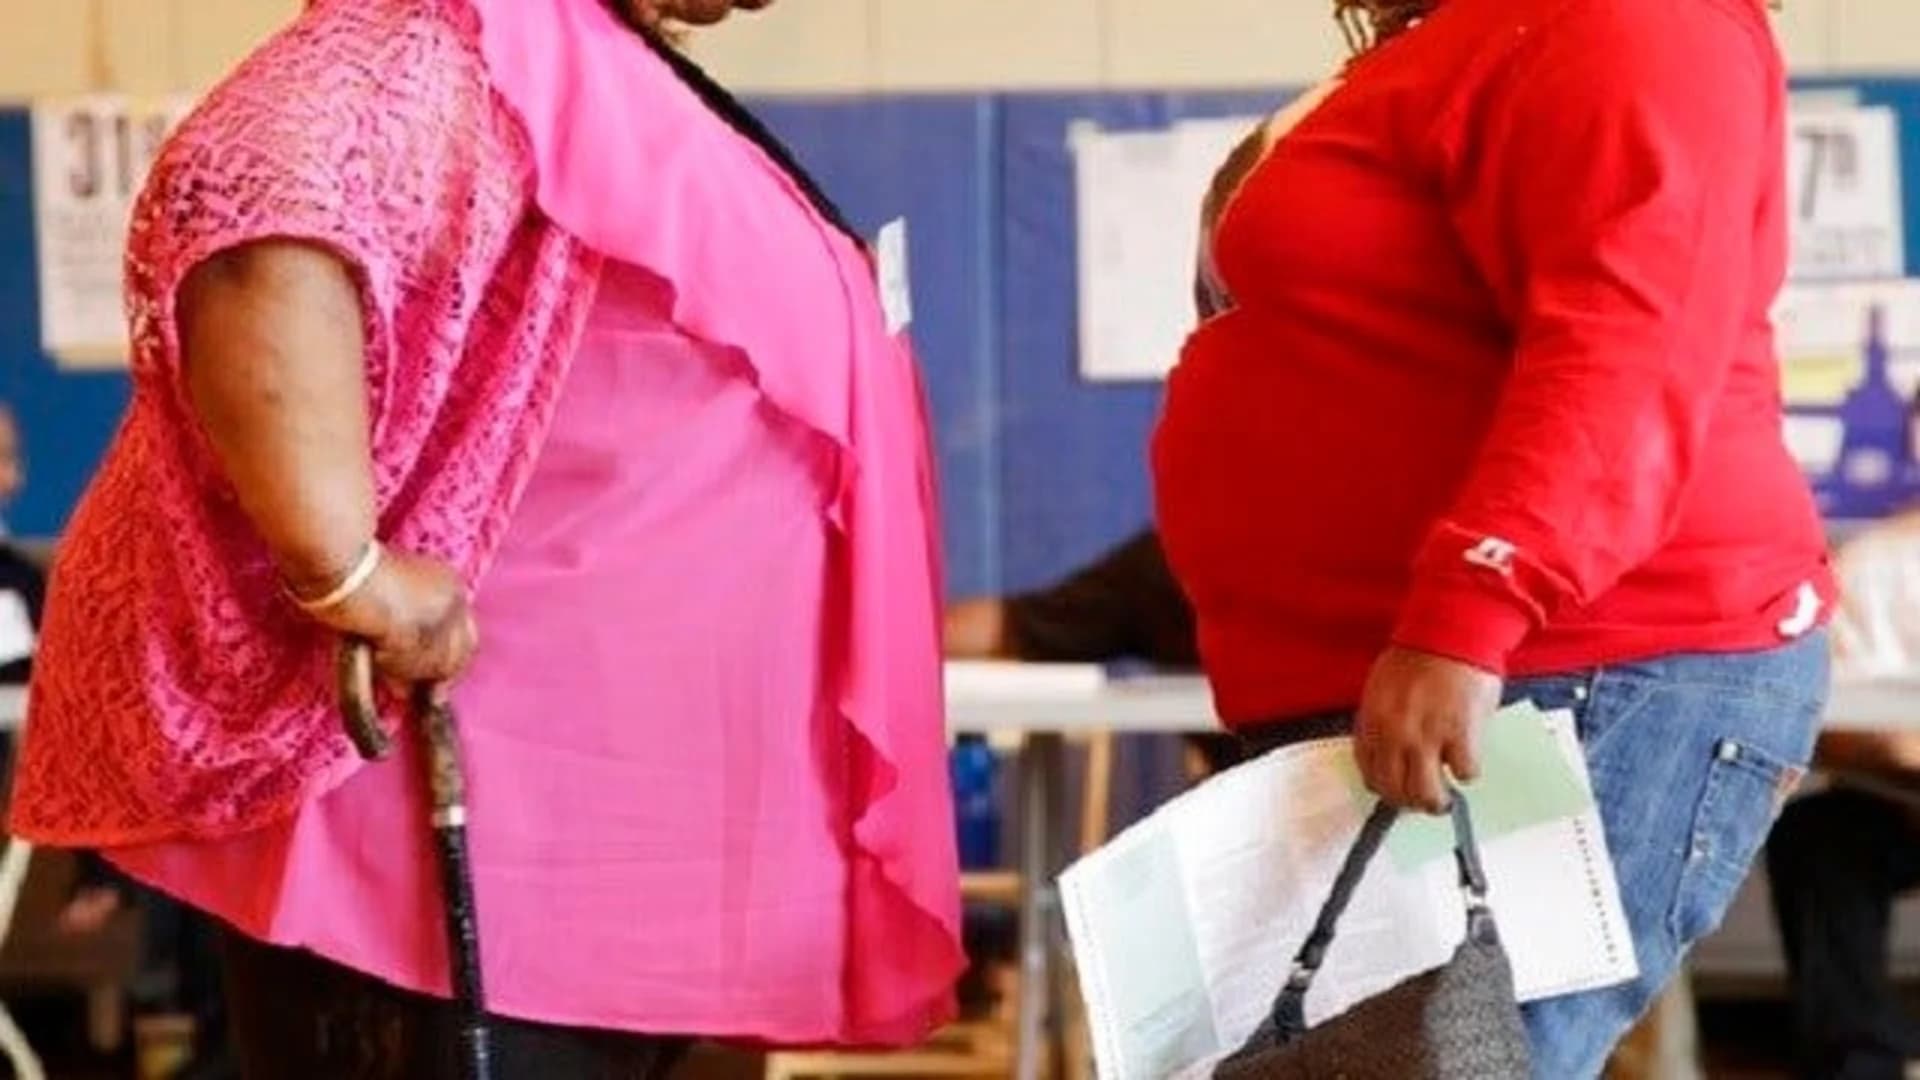 US obesity problem is not budging, new data shows